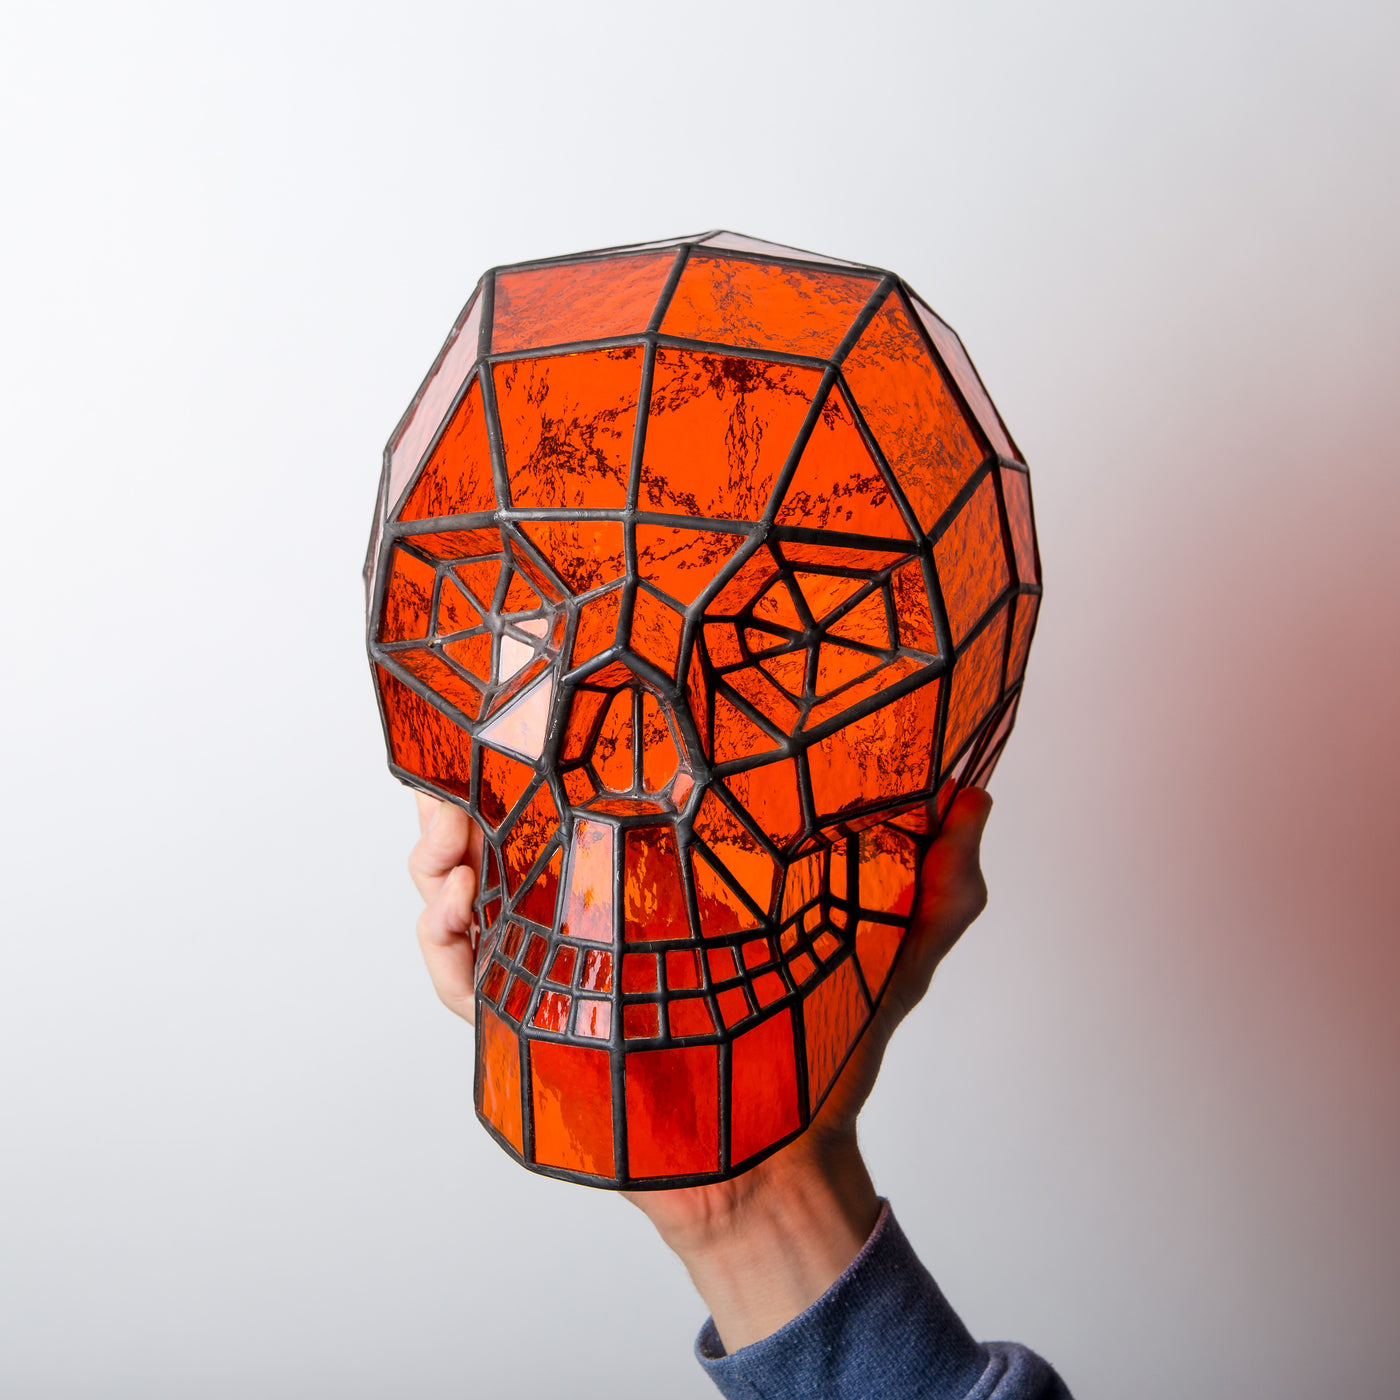 Orange stained glass 3D human skull decoration for Halloween